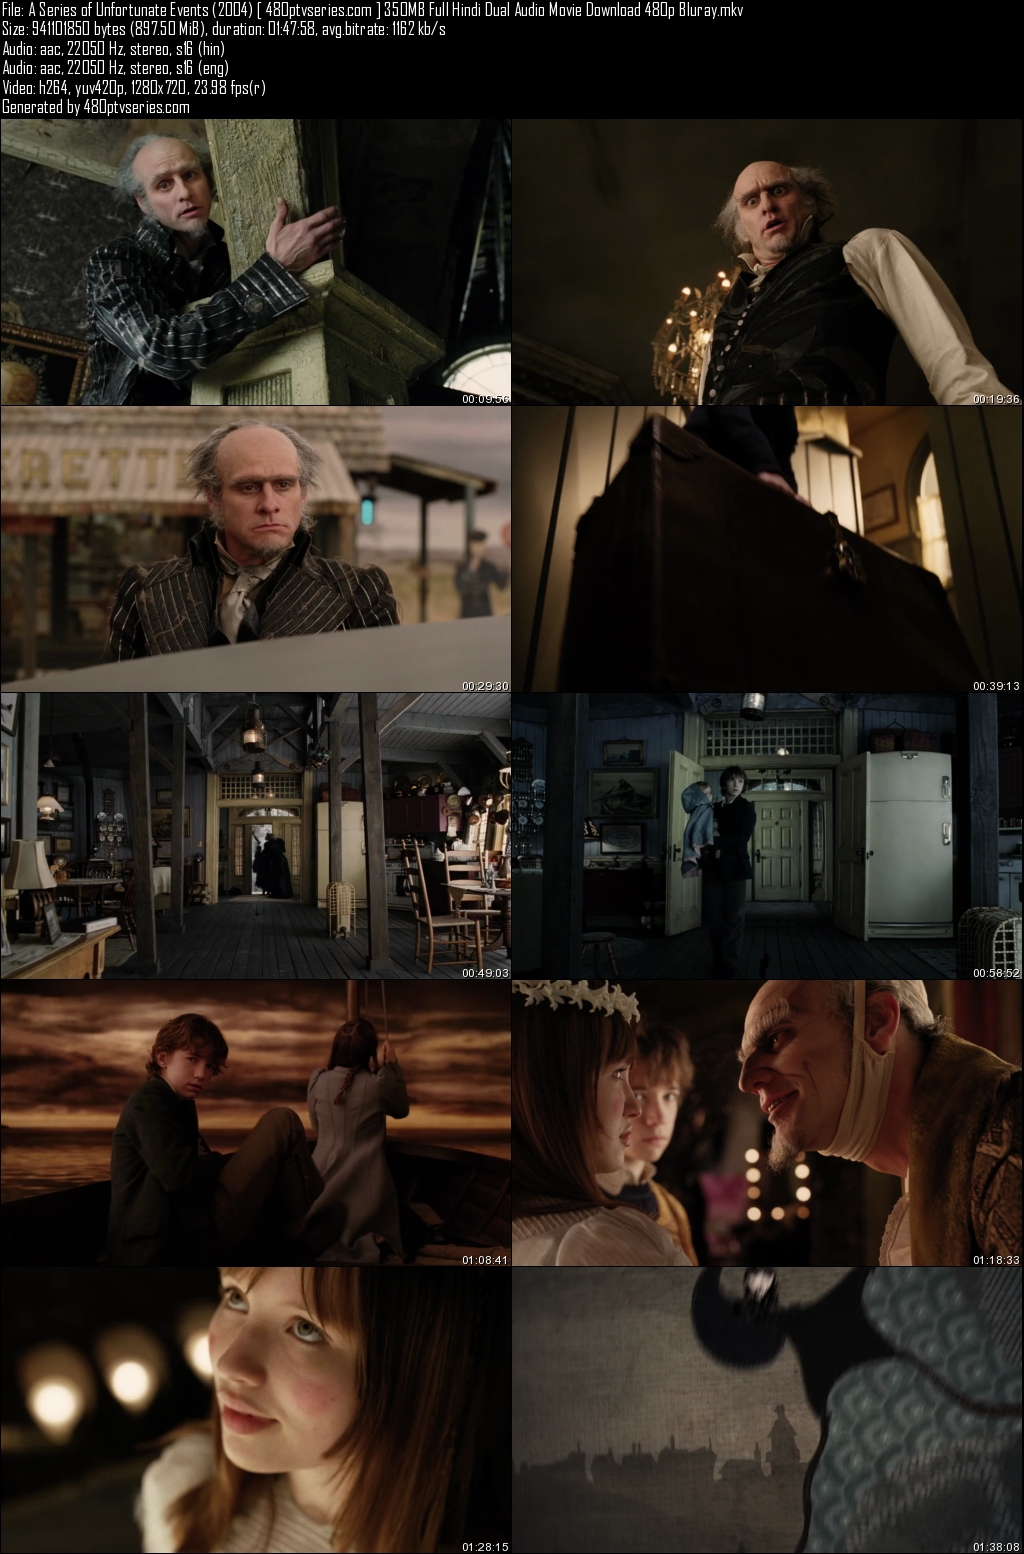 A Series of Unfortunate Events (2004) 350MB Full Hindi Dual Audio Movie Download 480p Bluray Free Watch online Full Movie Download Worldfree4u 9xmovies